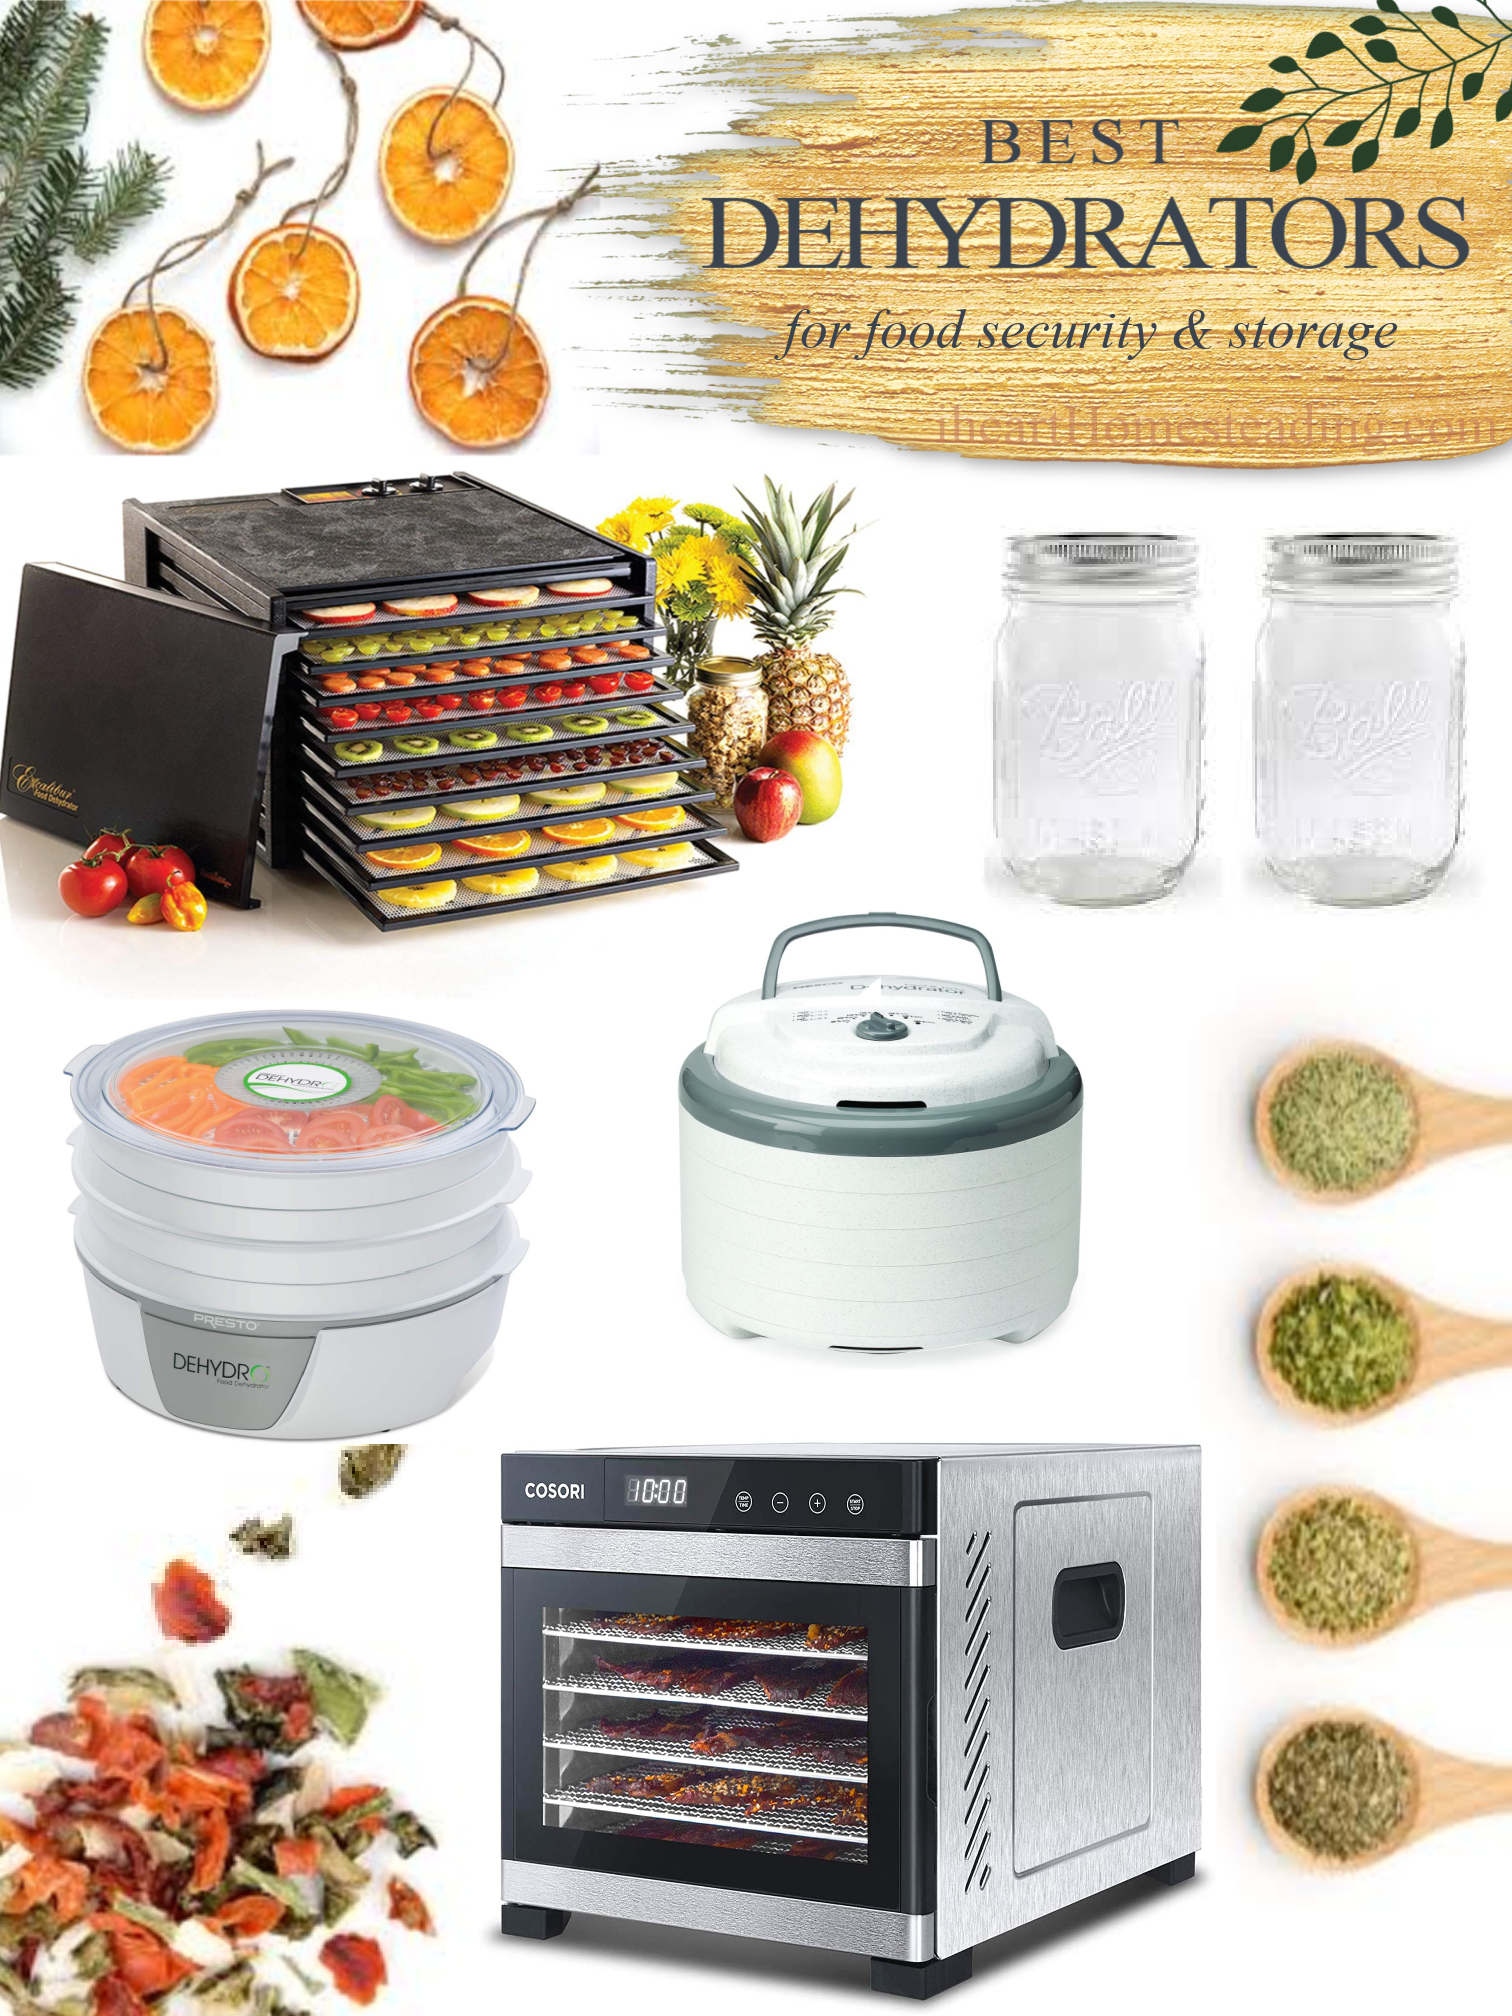 Best dehydrators for food security and storage